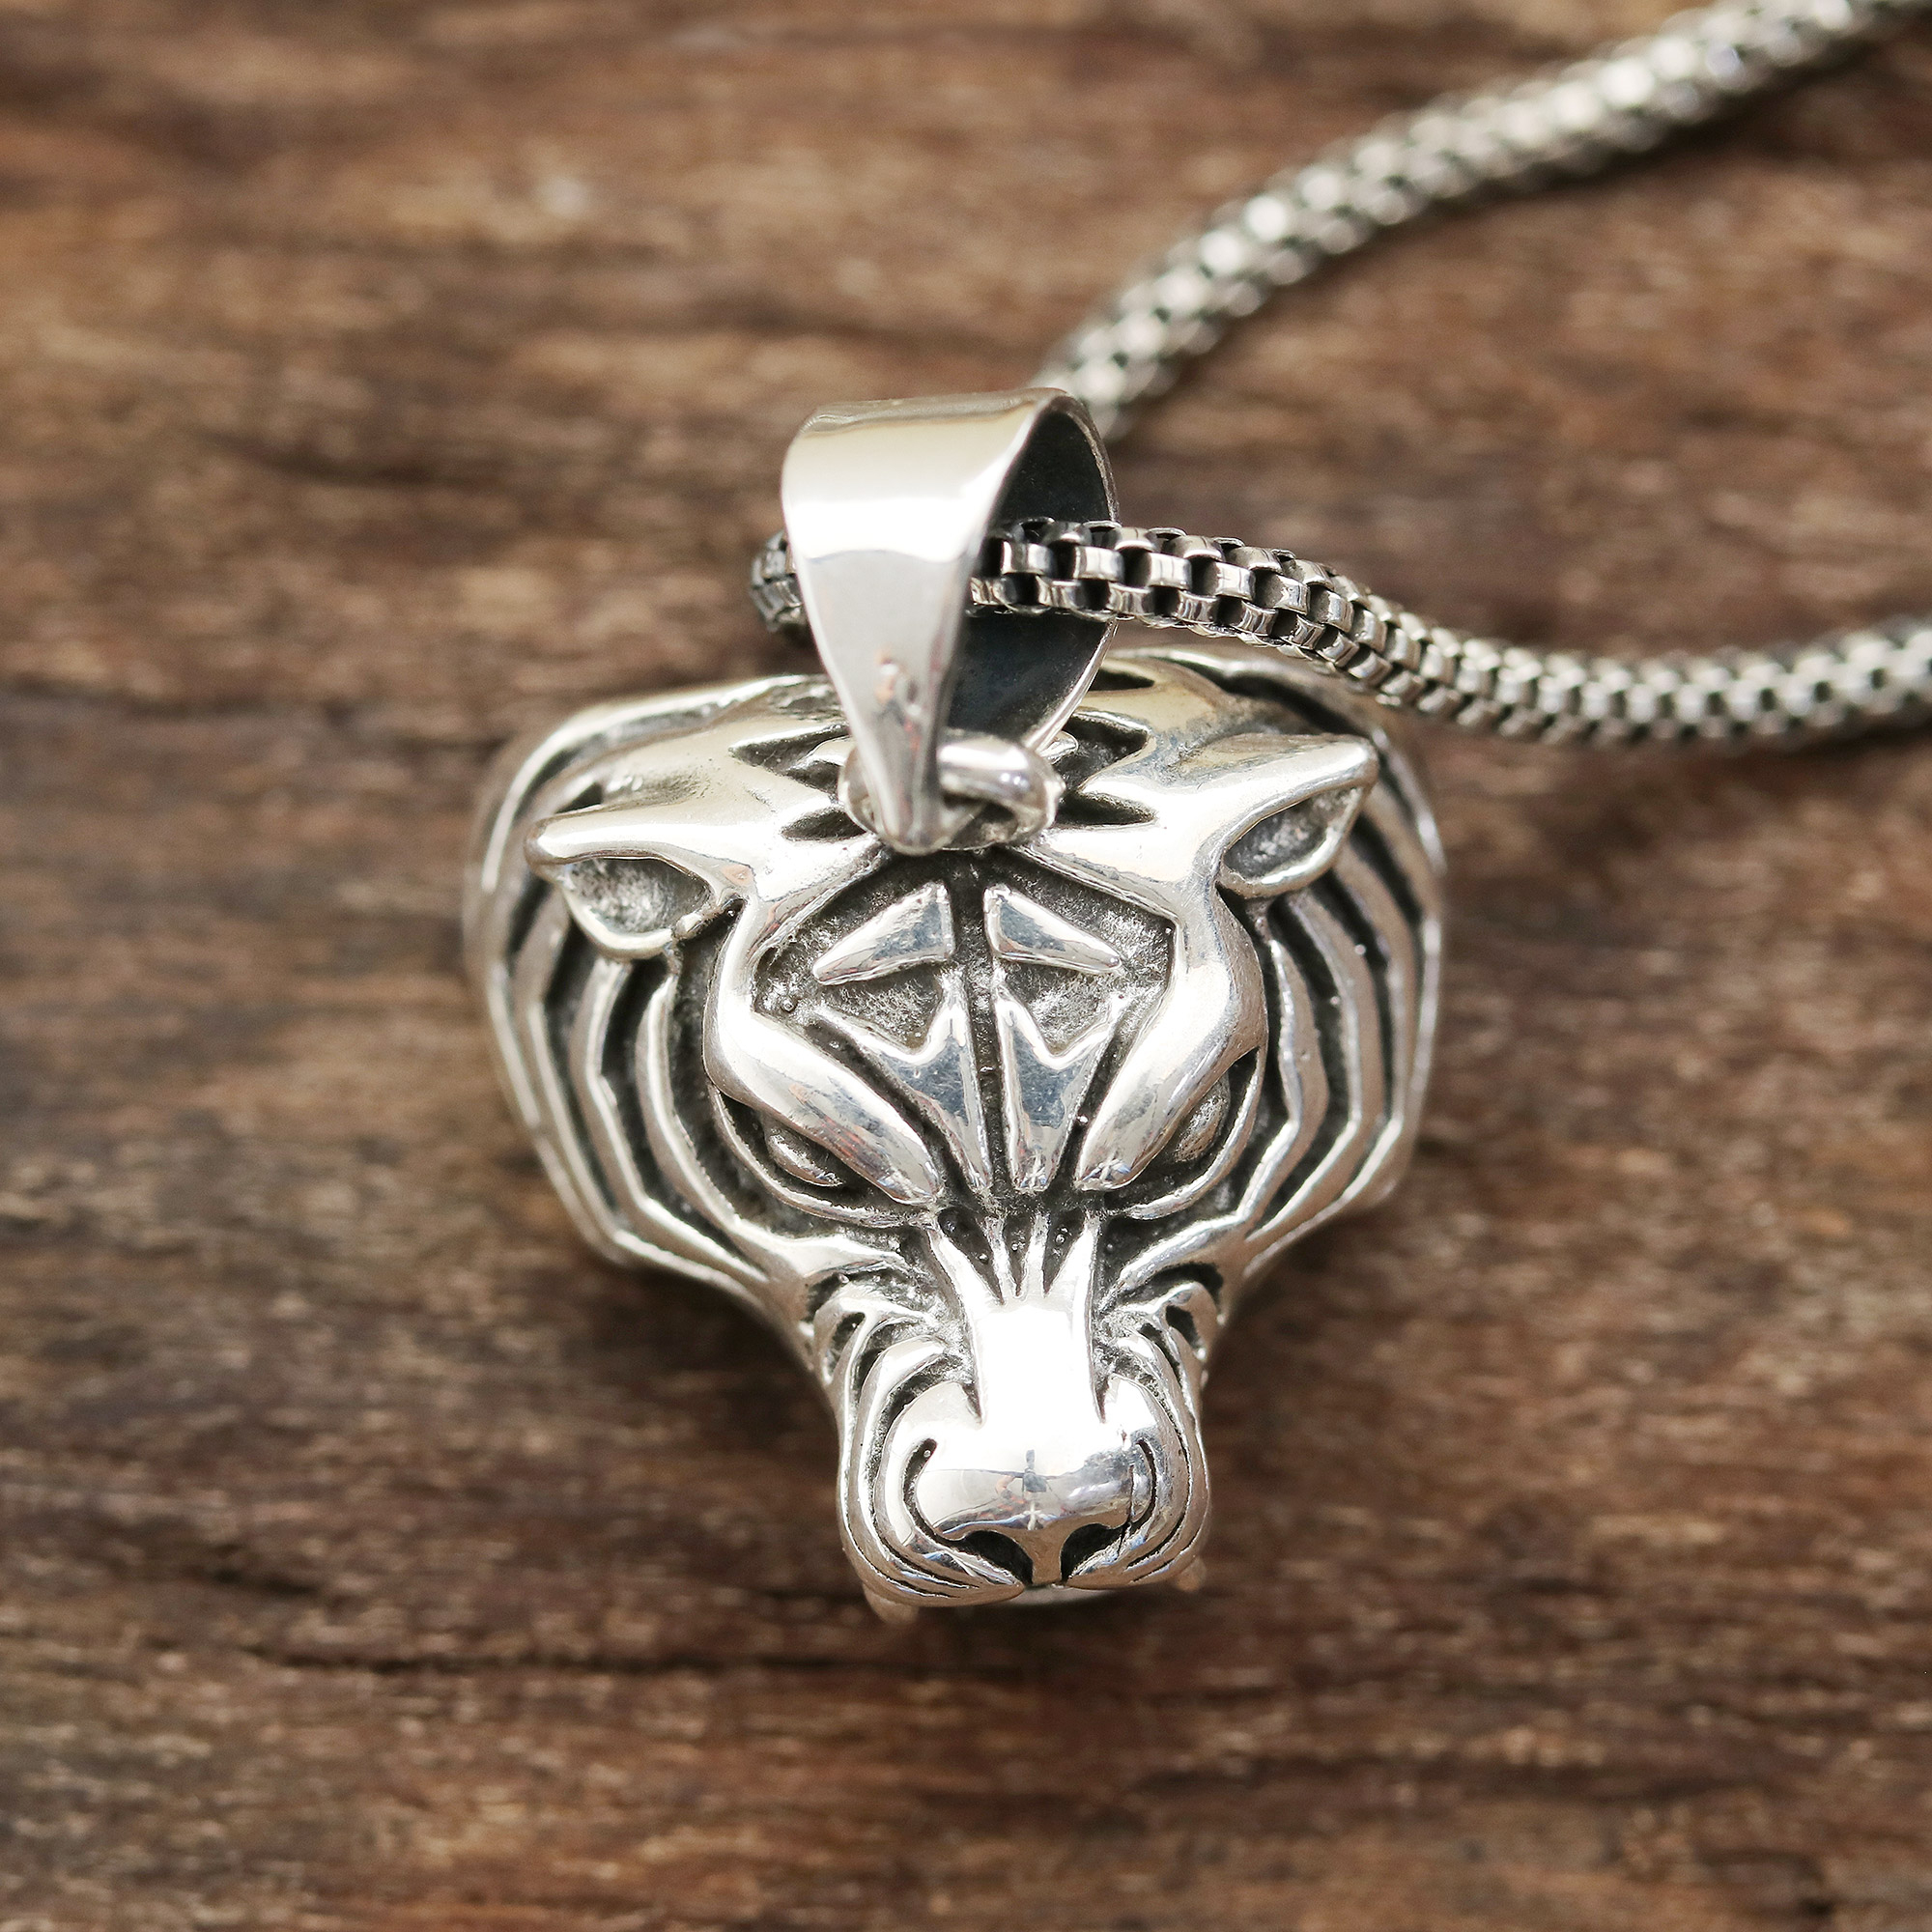 Sterling Silver Tiger Pendant Necklace from India - Swift Tiger | NOVICA